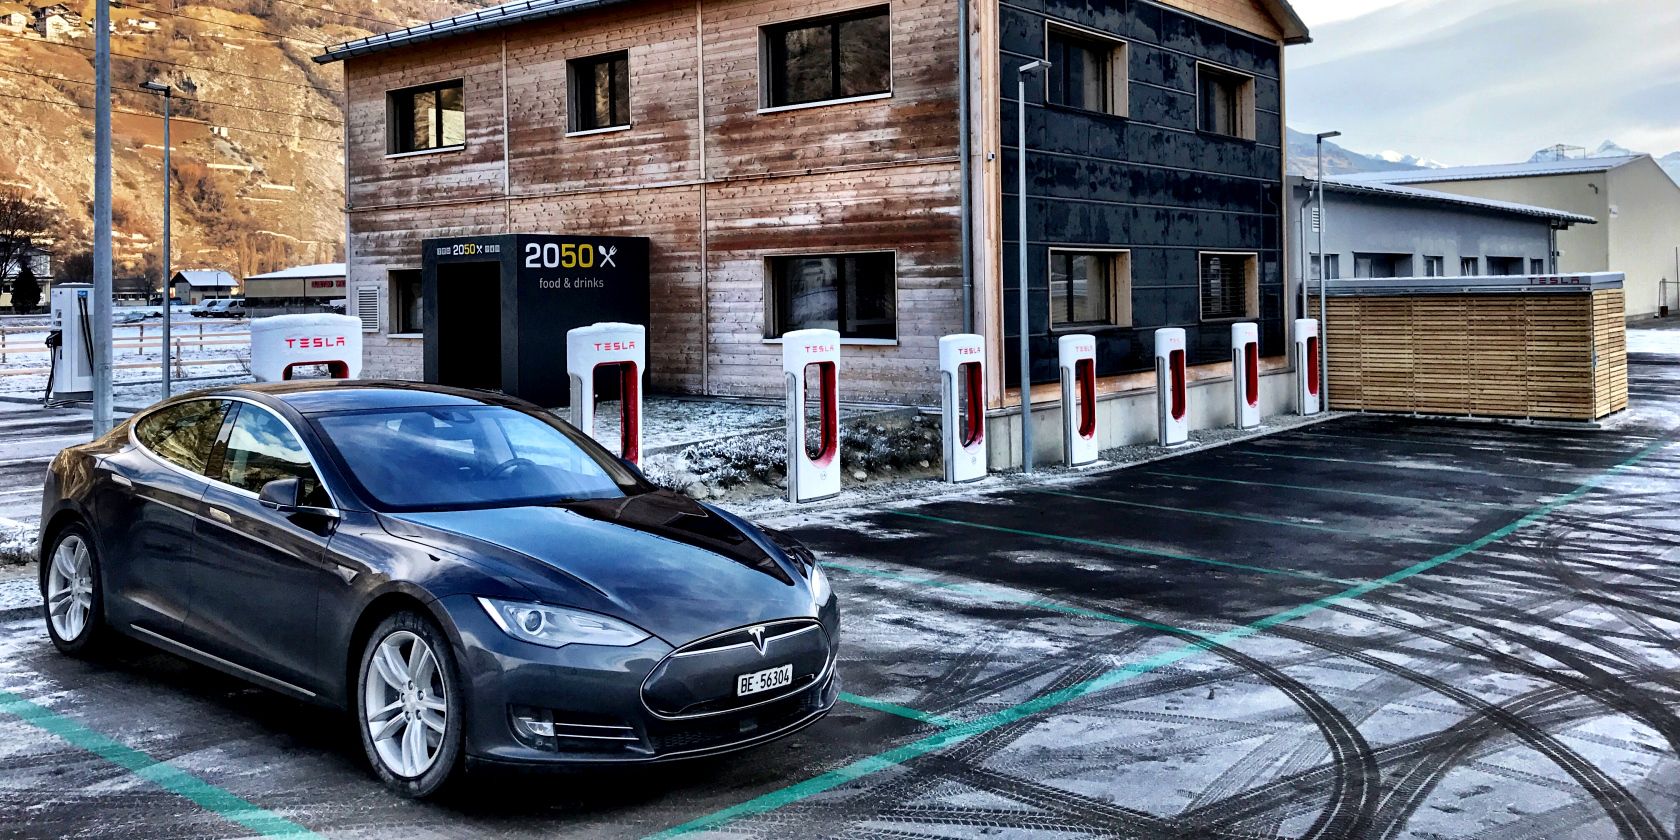 tesla supercharger stations in a row with tesla charging function